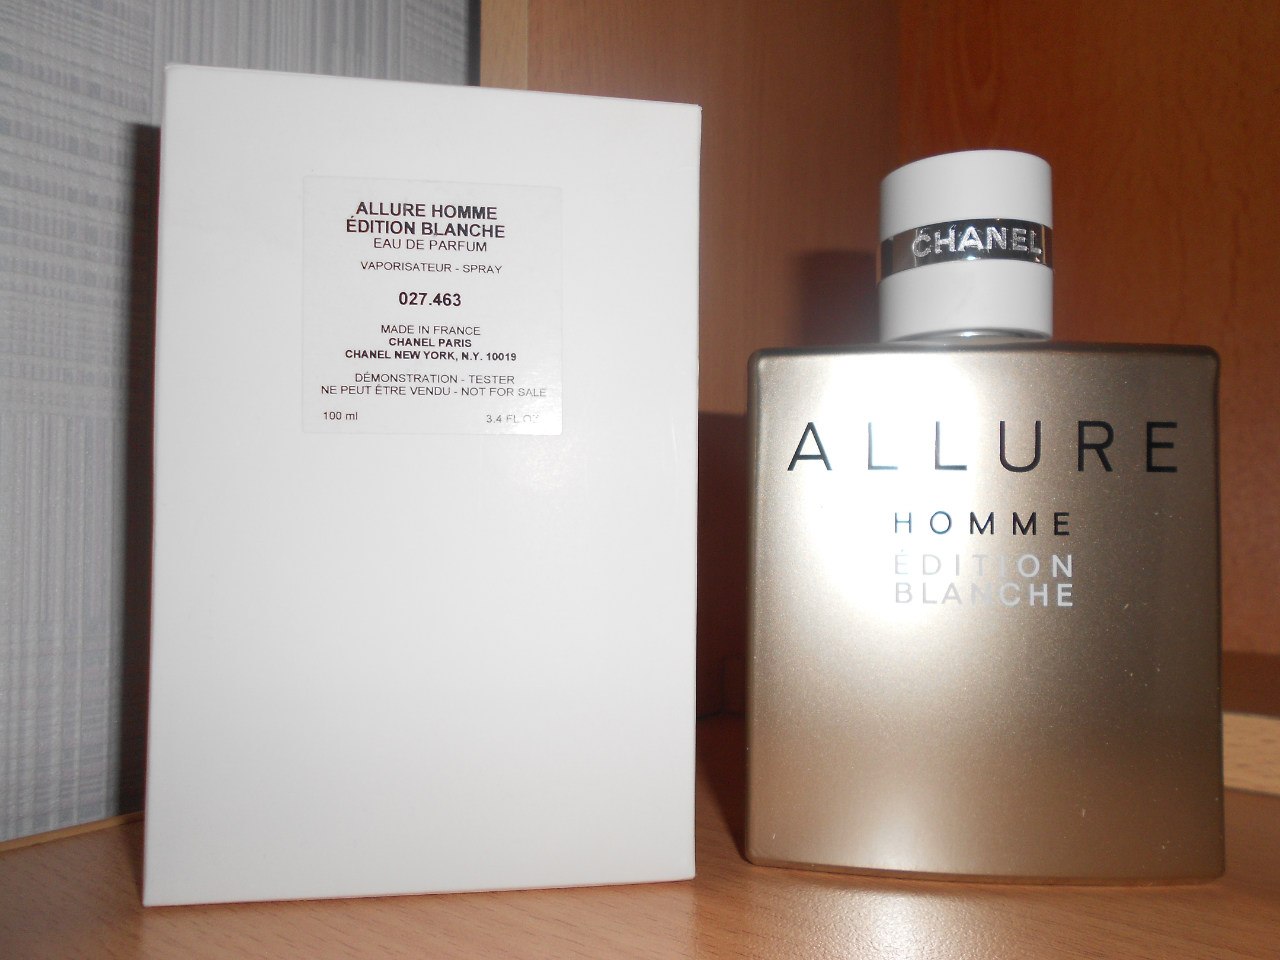 Chanel homme edition. Chanel Allure Edition Blanche 50ml (m). Chanel Allure Edition Blanche men 50ml EDP. Chanel Allure 50ml (m). Chanel Allure homme Edition Blanche m 100 ml EDP.